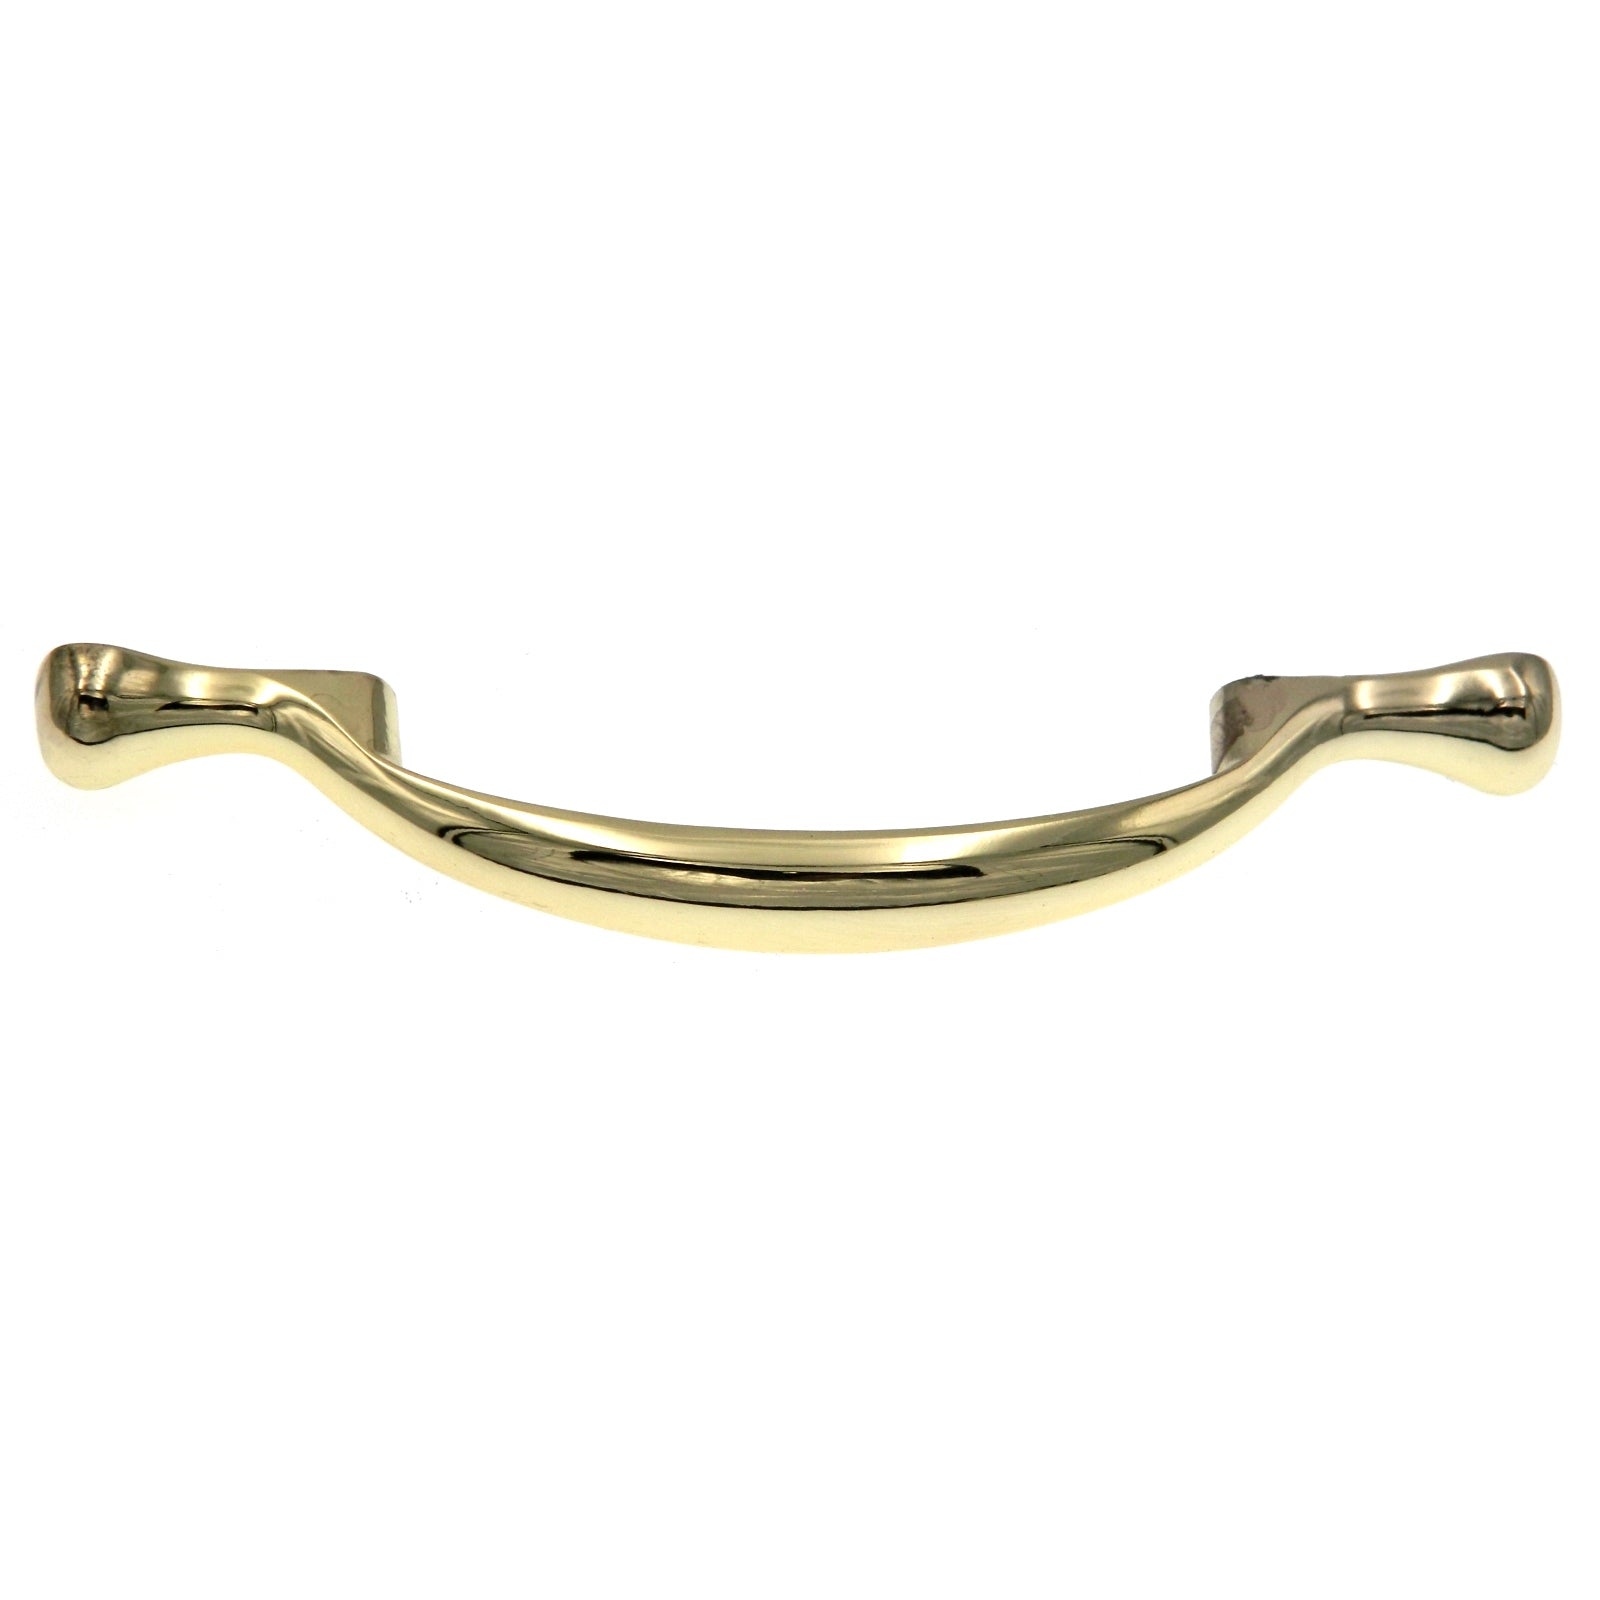 Warwick Traditional Polished Brass 3"cc Solid Cabinet Handle Pull DH1009PB